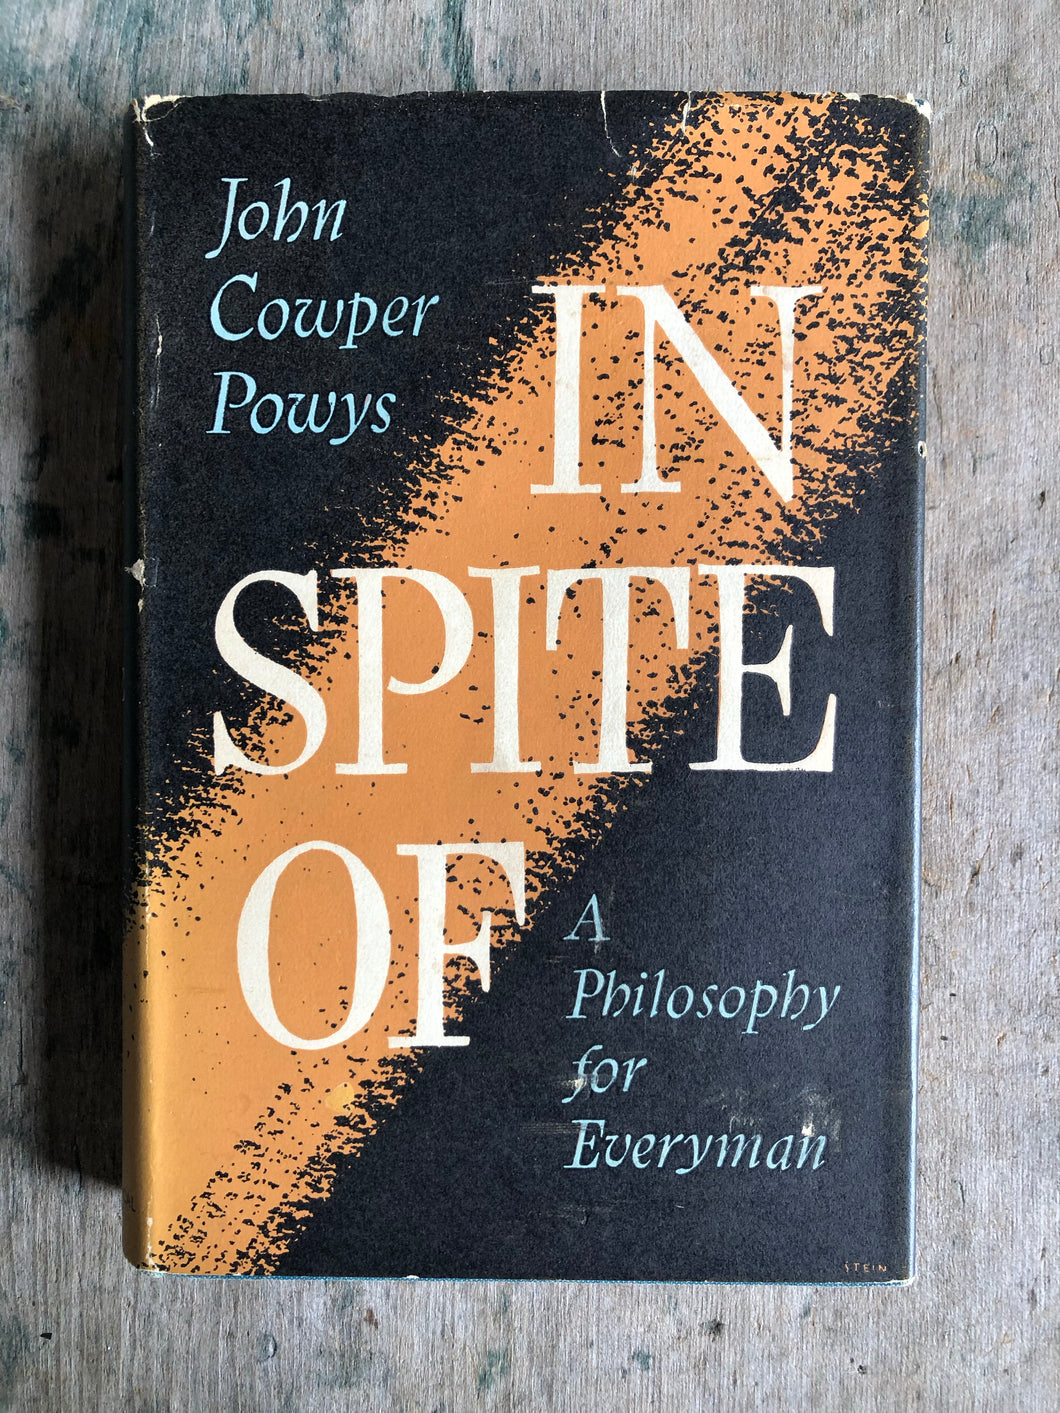 “In Spite Of: A Philosophy for Everyman” by John Cowper Powys